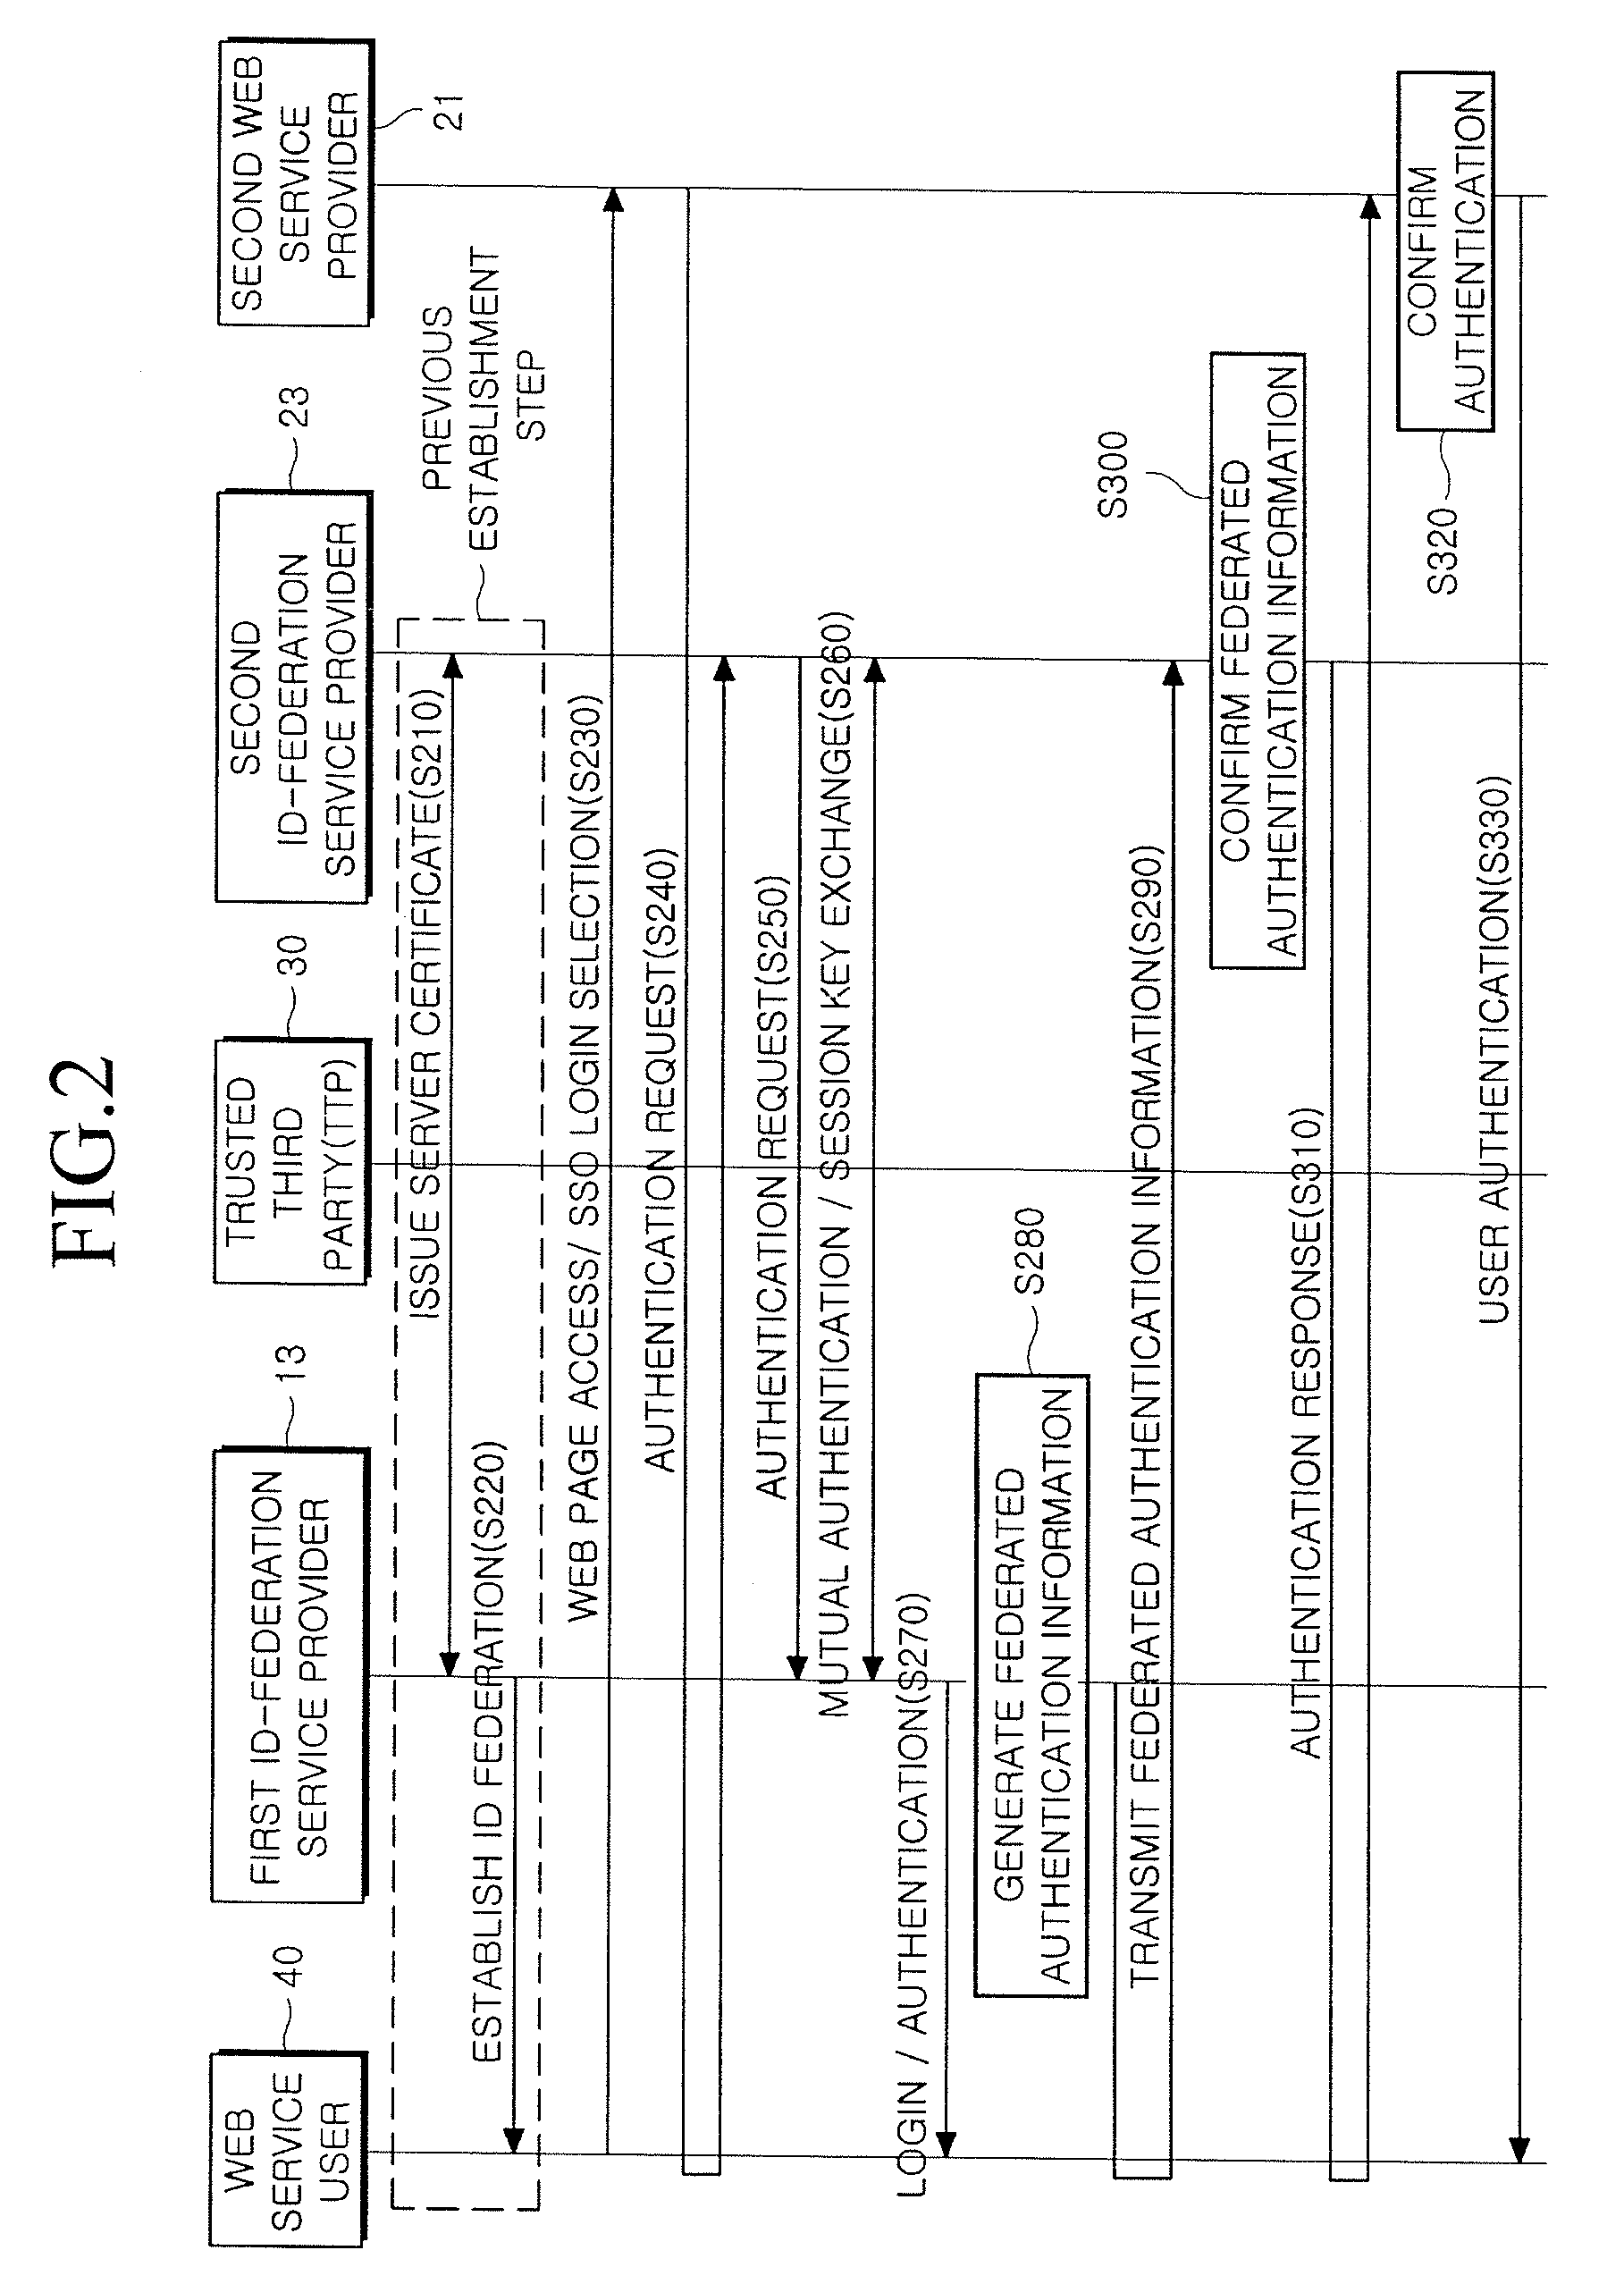 Method and system for providing single sign-on service